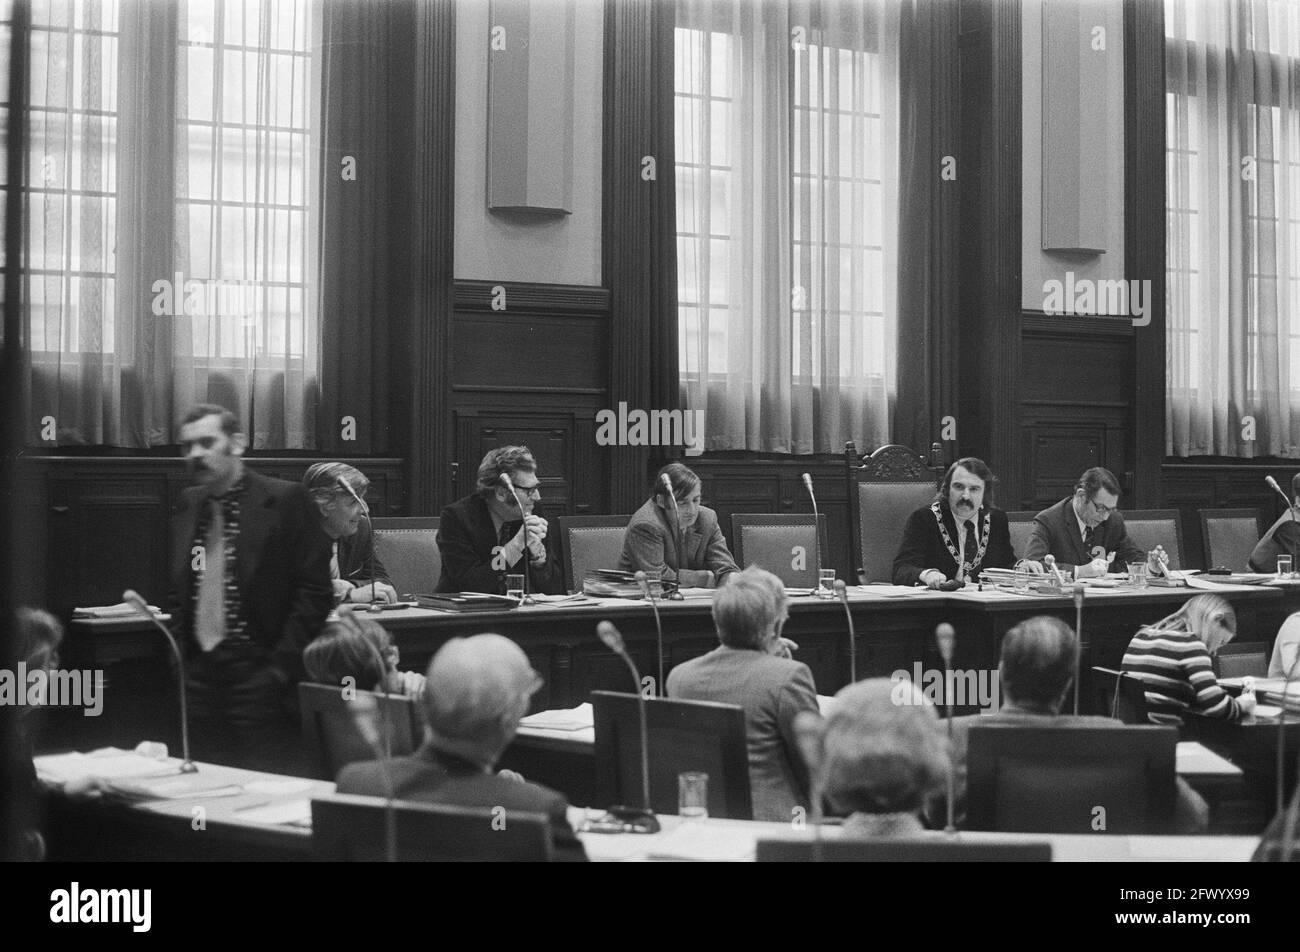 Rotterdam City Council on prostitution on Katendrecht; council meeting aldermen. De Jong, Van der Have, Mentink and Mayor Van der Louw, February 20, 1975, mayors, city councils, aldermen, The Netherlands, 20th century press agency photo, news to remember, documentary, historic photography 1945-1990, visual stories, human history of the Twentieth Century, capturing moments in time Stock Photo